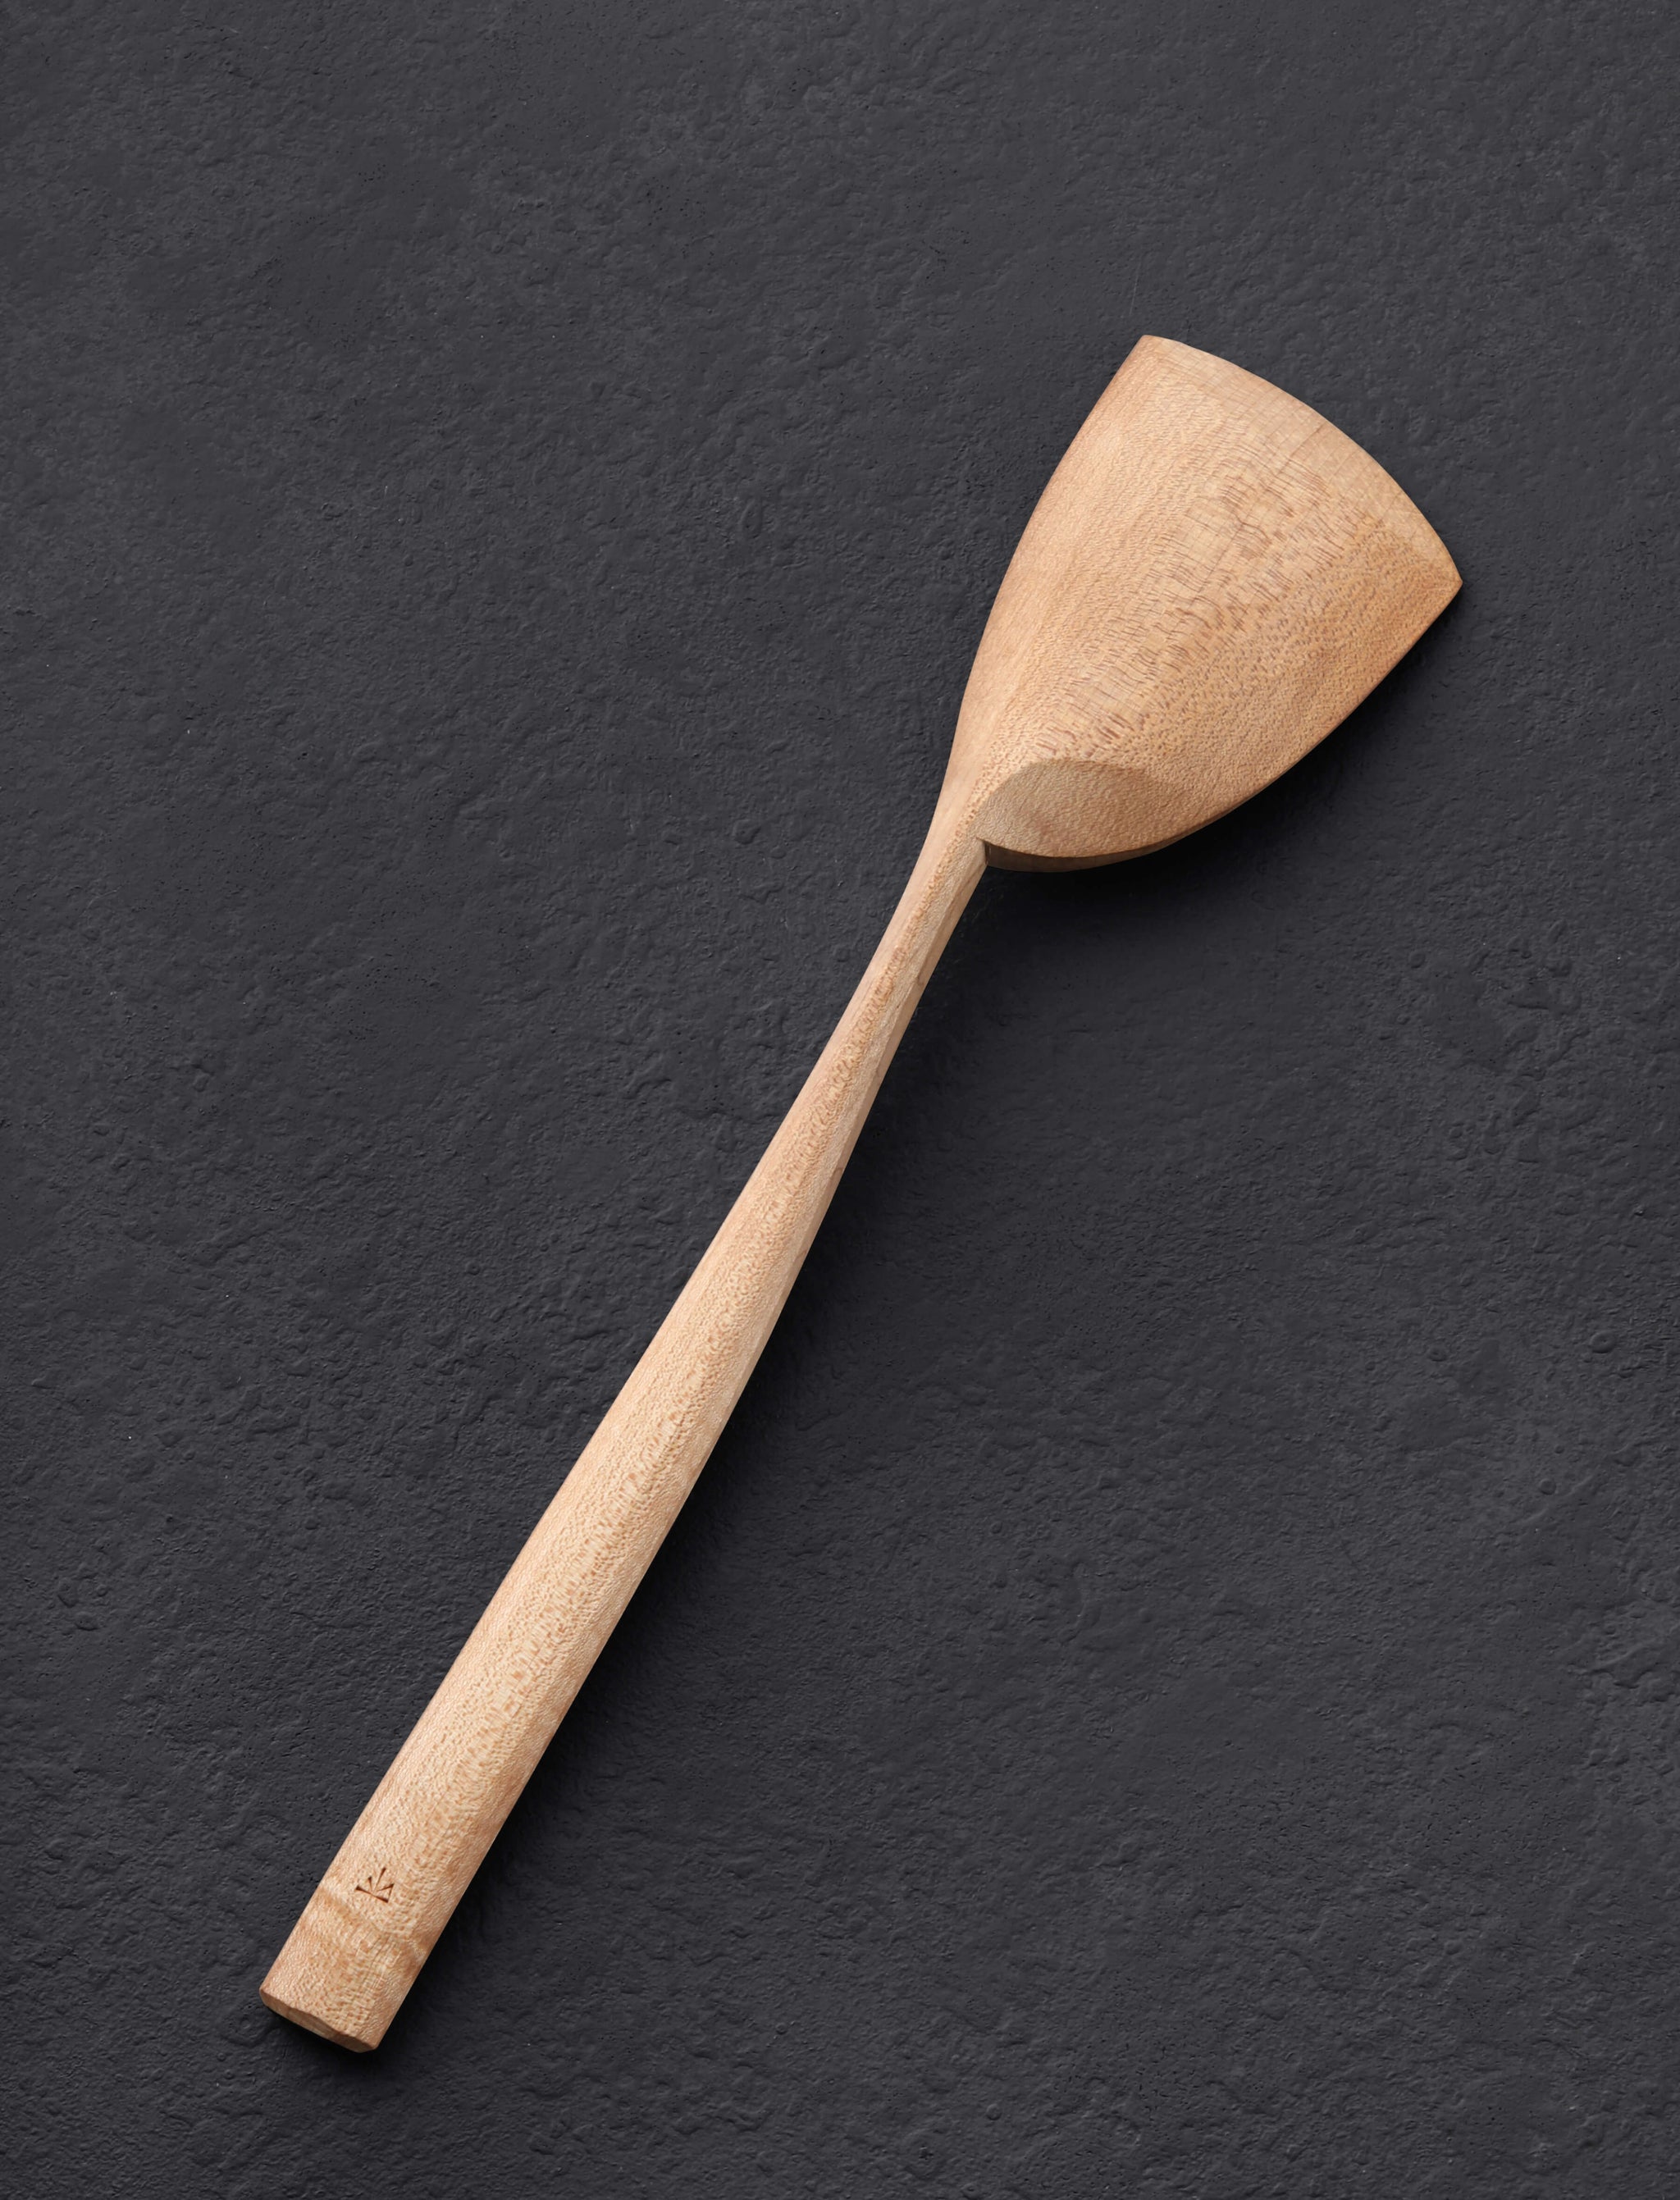 Maple Cooking Tools